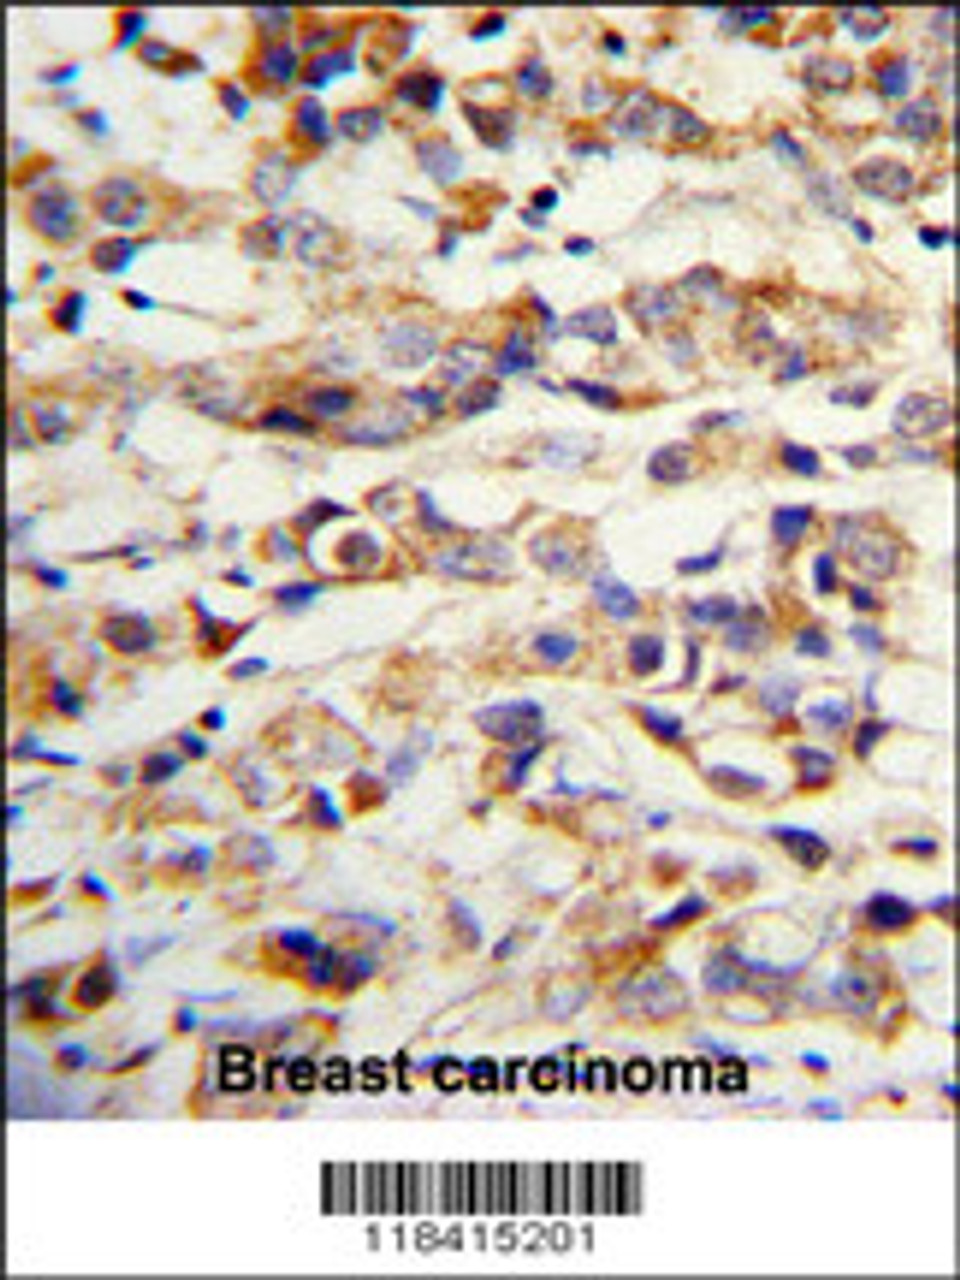 Formalin-fixed and paraffin-embedded human breast carcinoma with KRT14 Antibody, which was peroxidase-conjugated to the secondary antibody, followed by DAB staining.